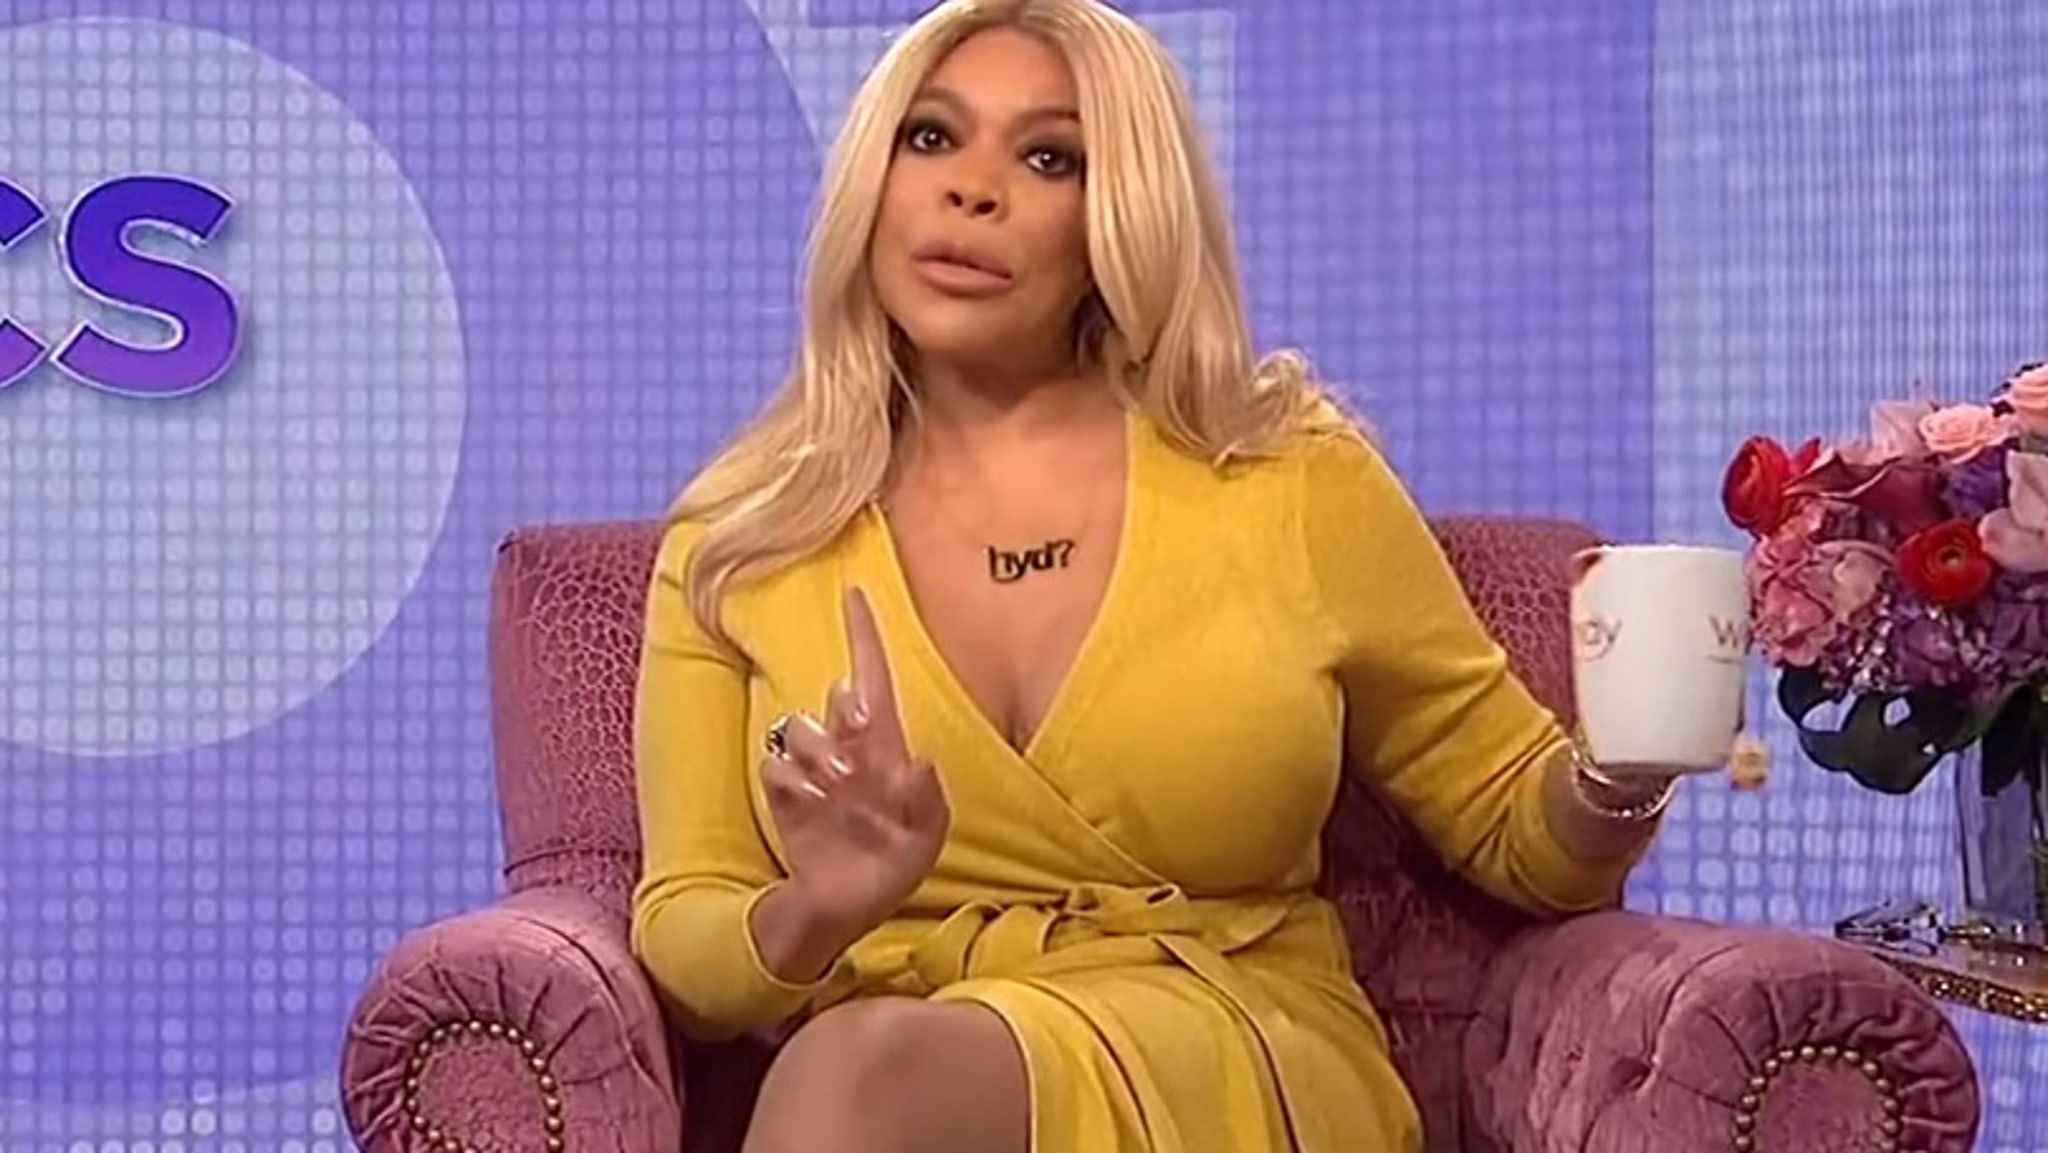 Wendy Williams Shades ex-husband ‘Kelvin’ and mistress in the show – even name drops!